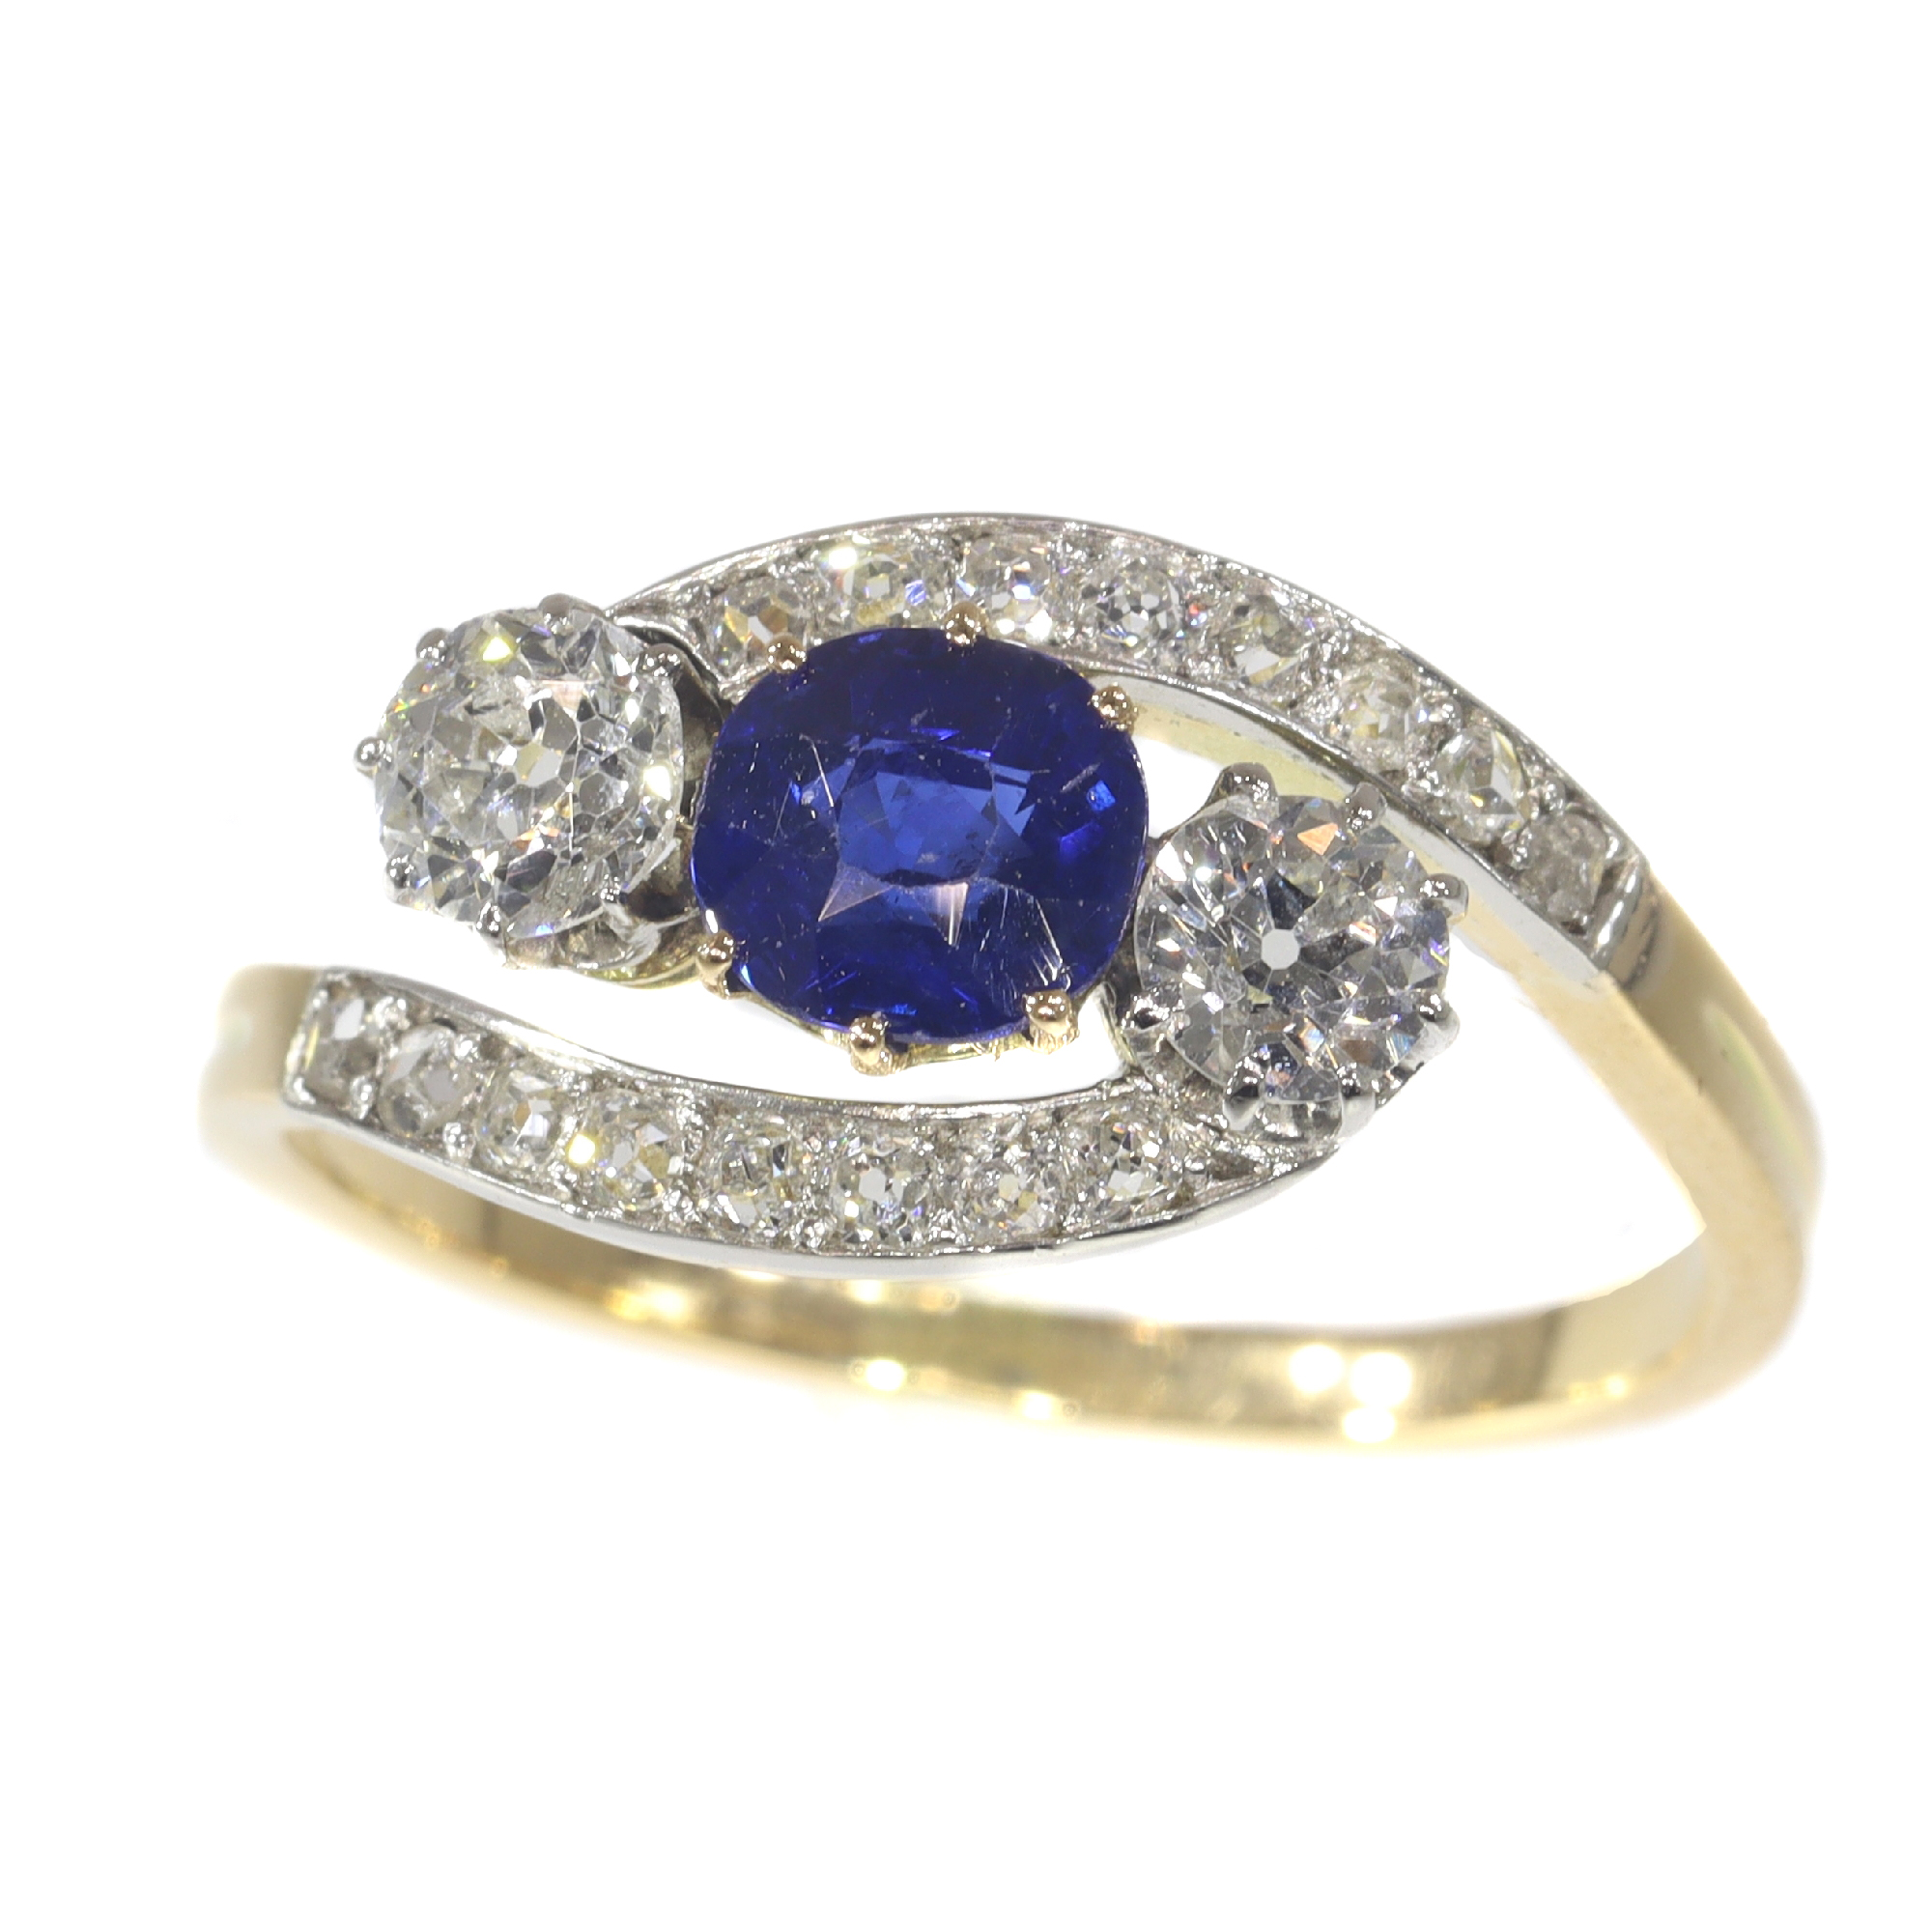 Belle Époque Brilliance: A Sapphire Ring with Timeless Charm